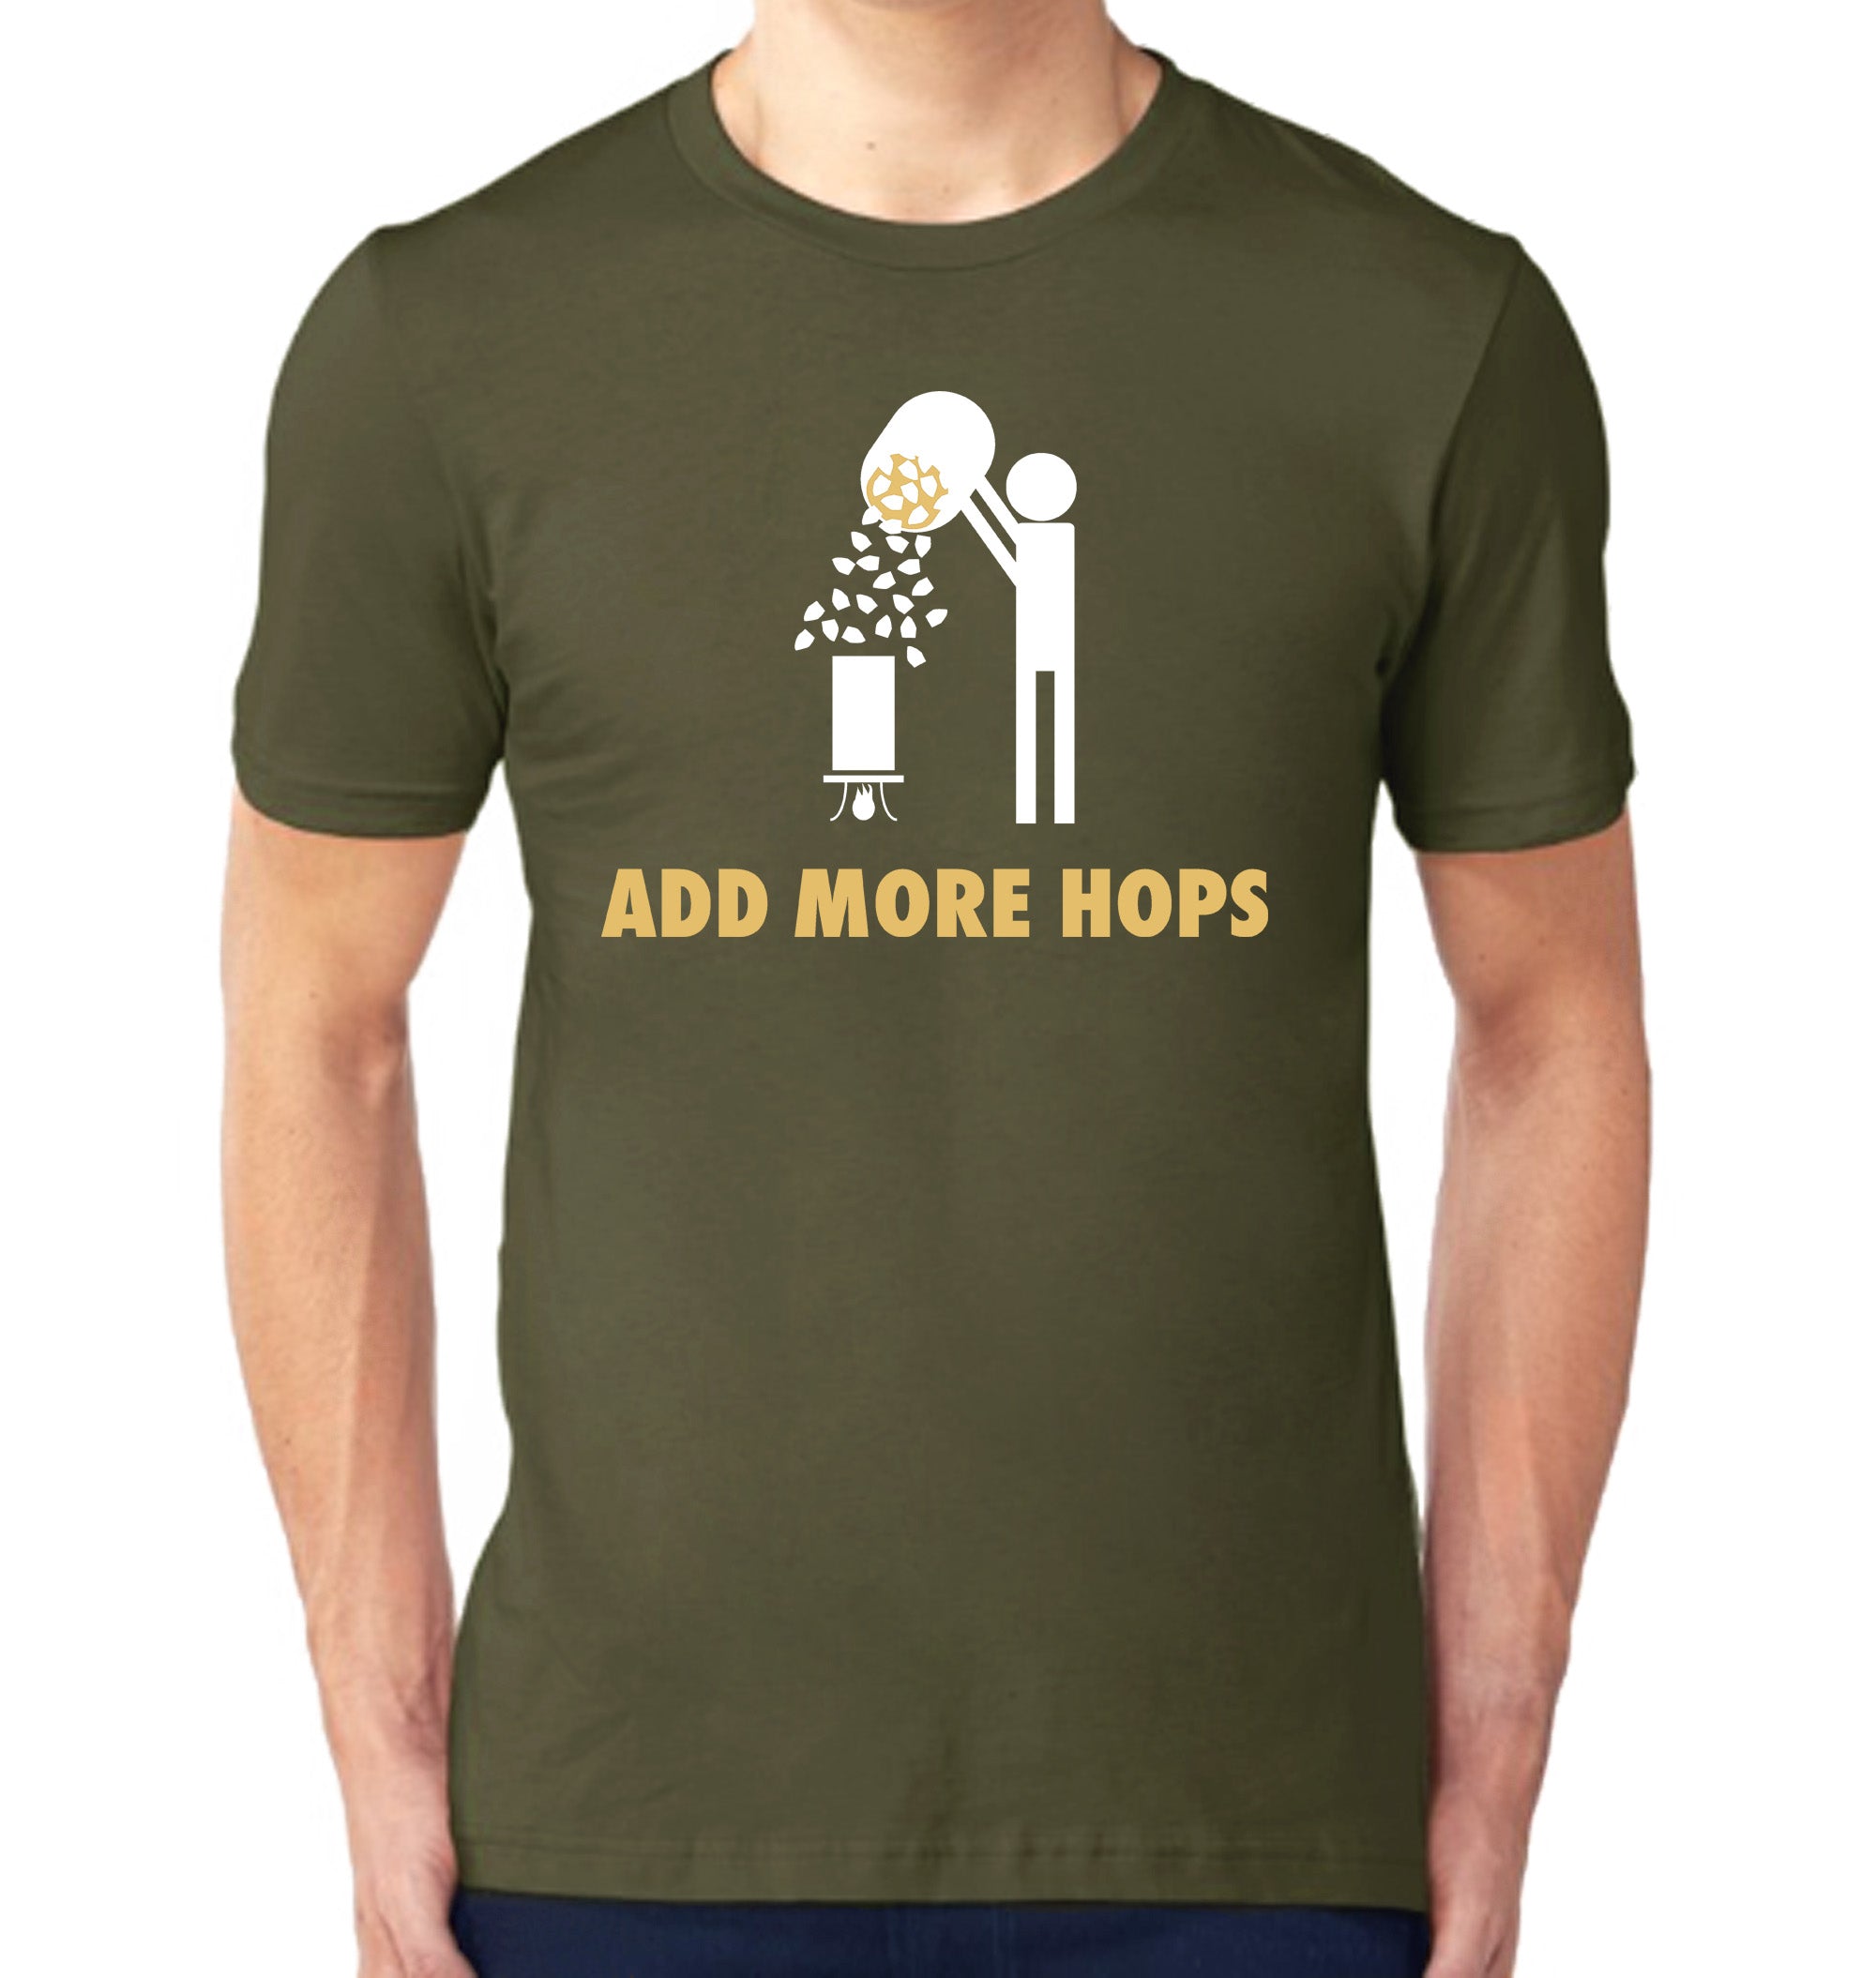 Add More Hops Homebrewing T-Shirt on Male Model